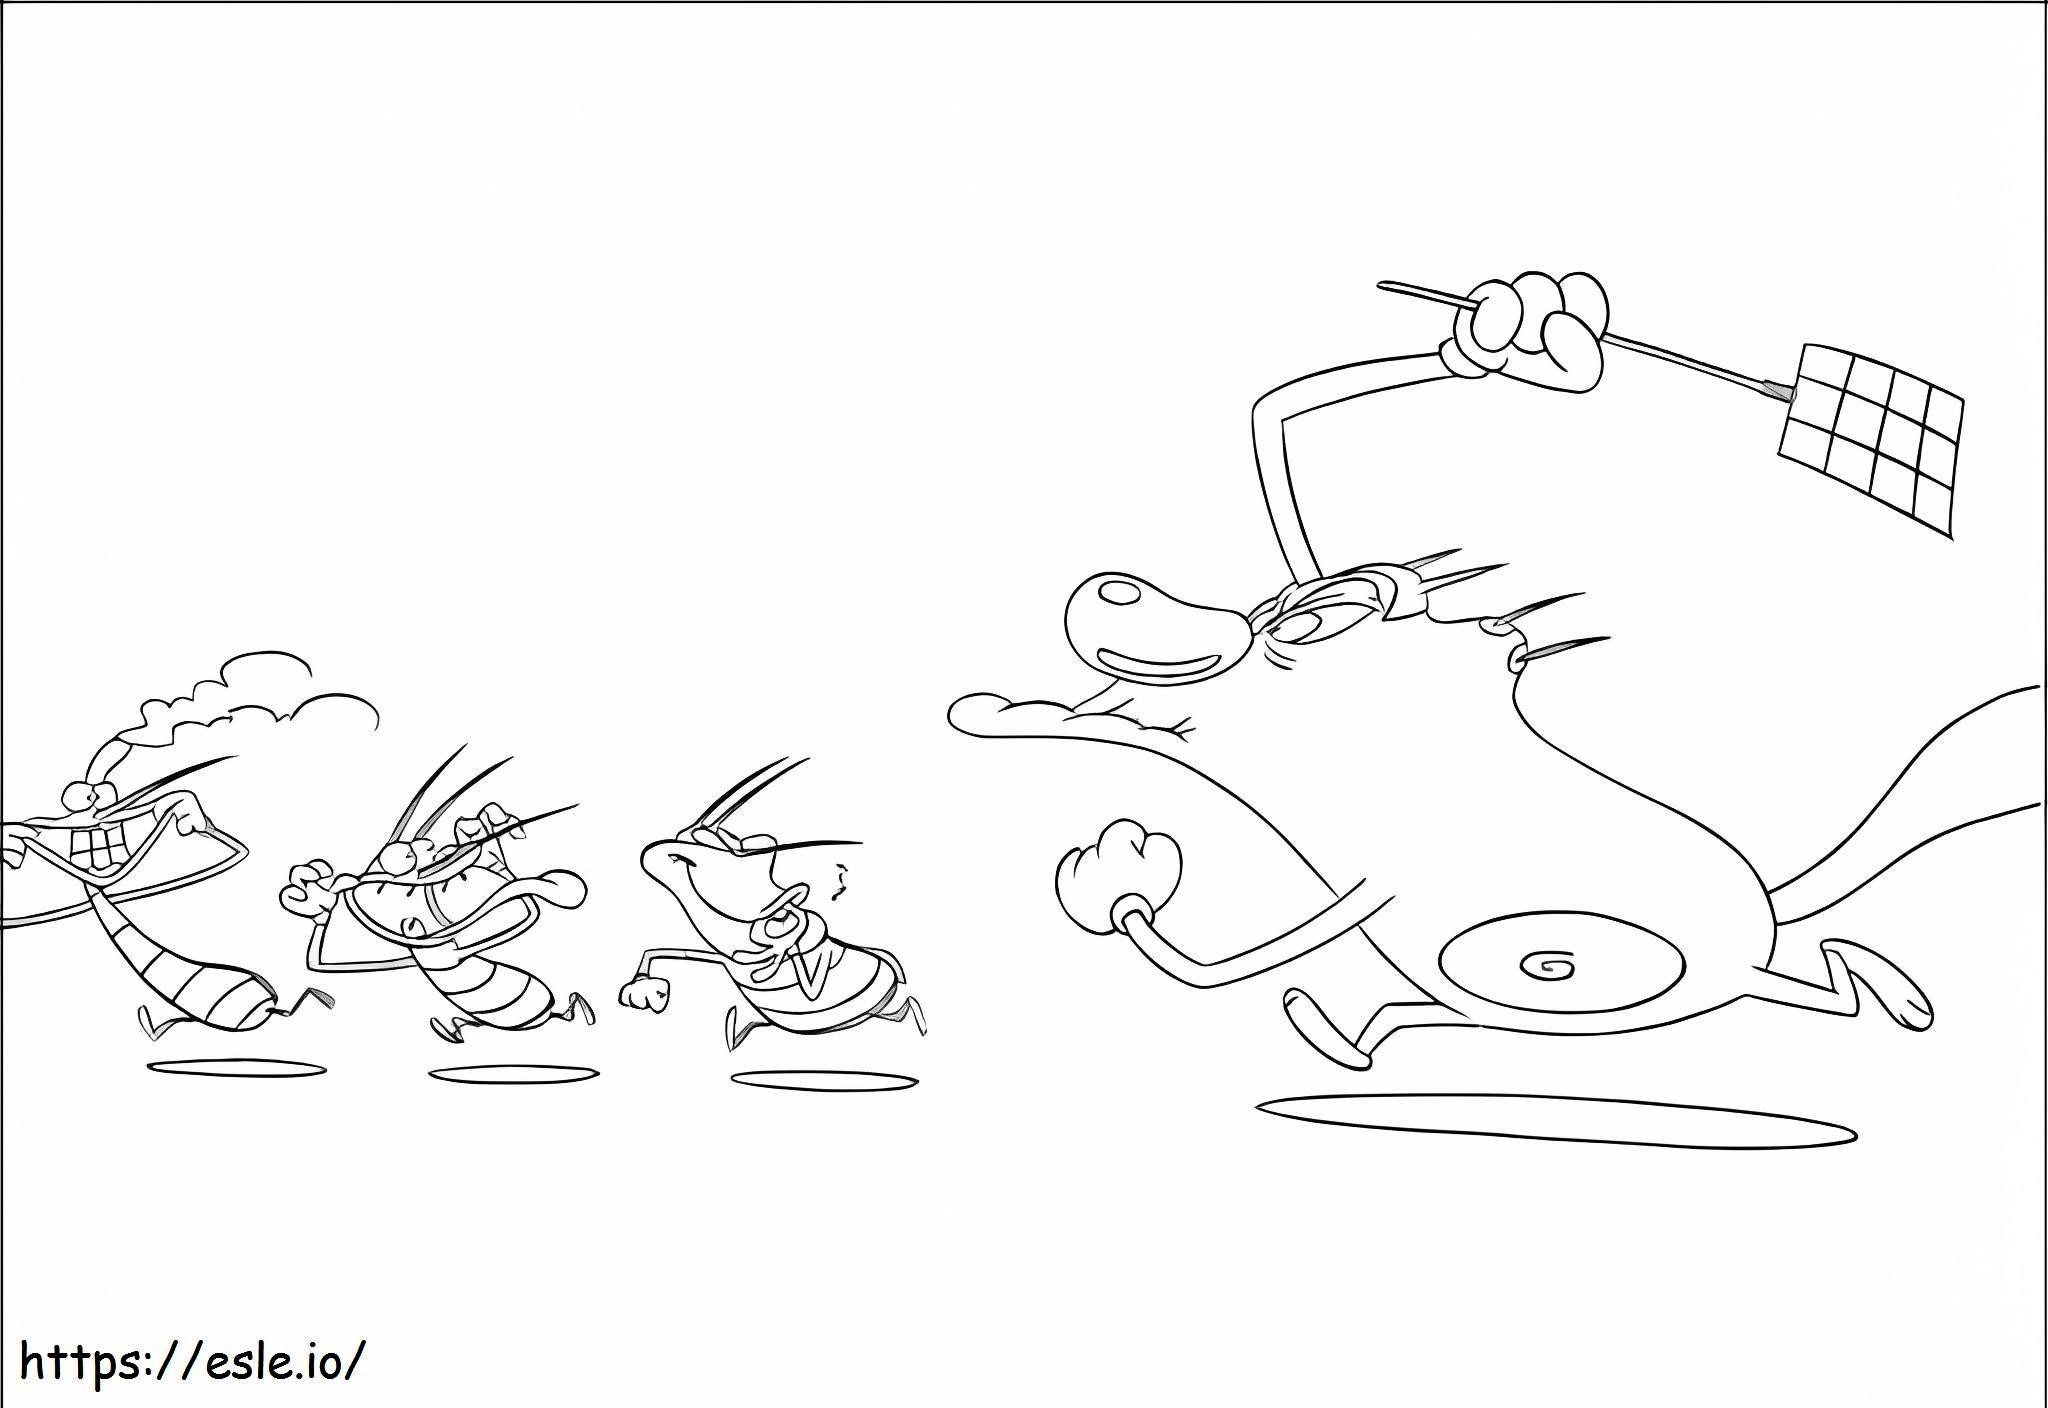 Oggy Running coloring page